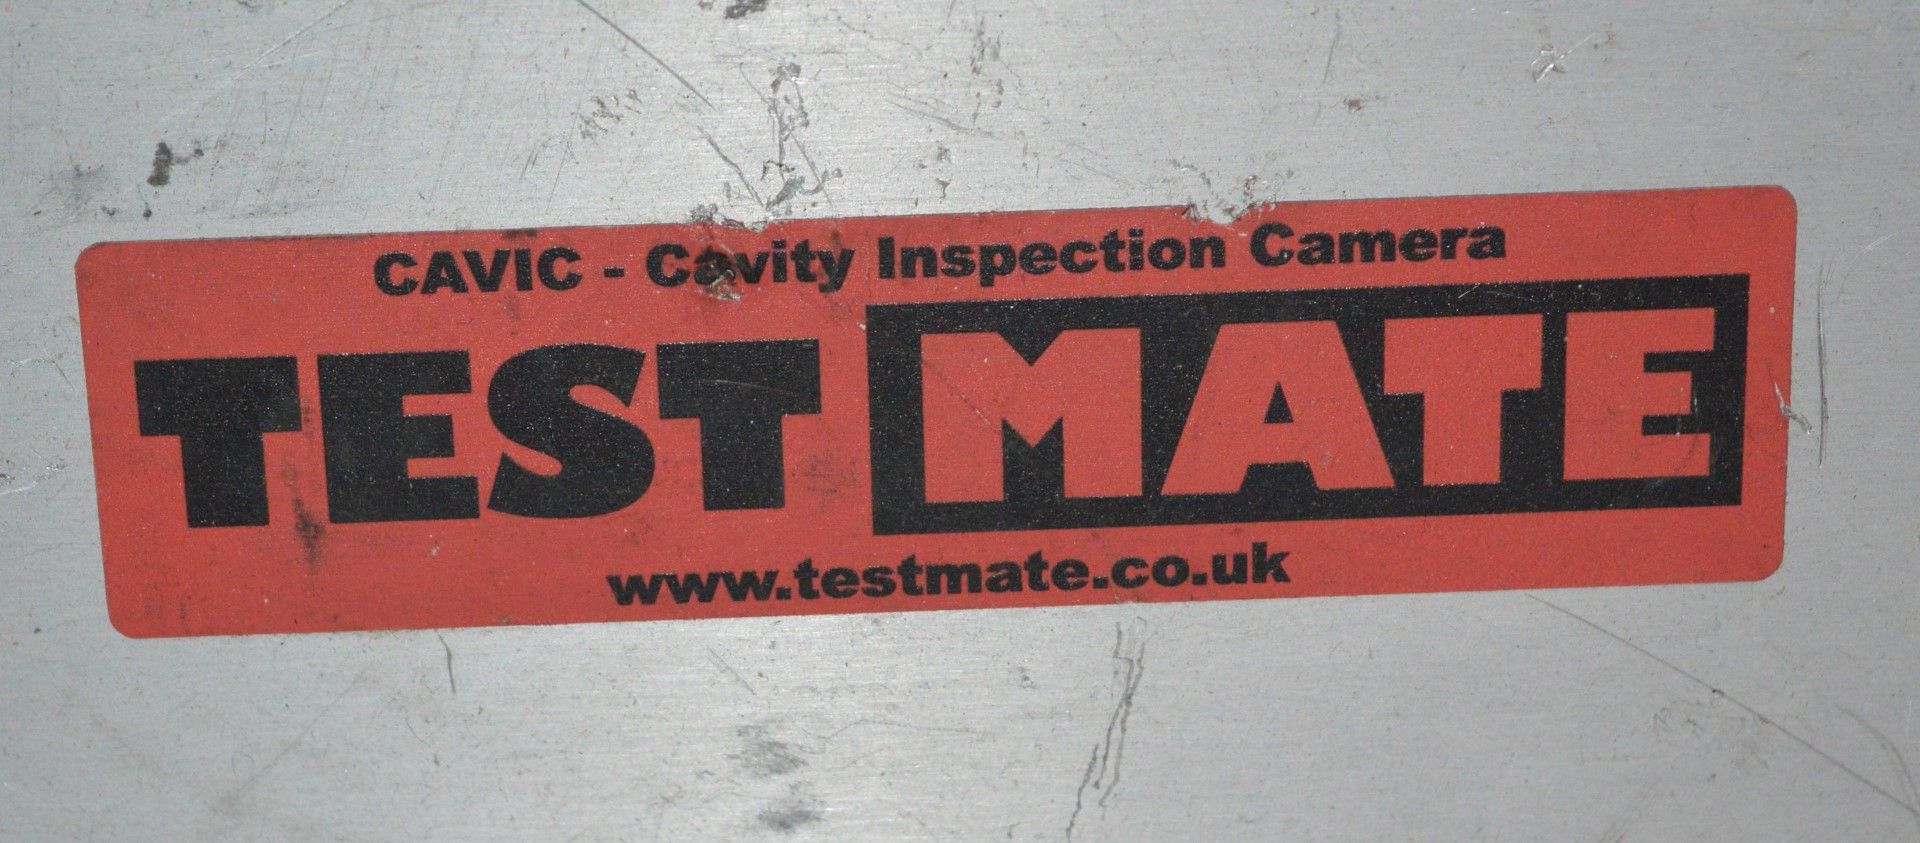 1 x Cavic Test Mate Cavity Inspection Camera - Includes Wireless Inspection Camera and Video - Image 3 of 6